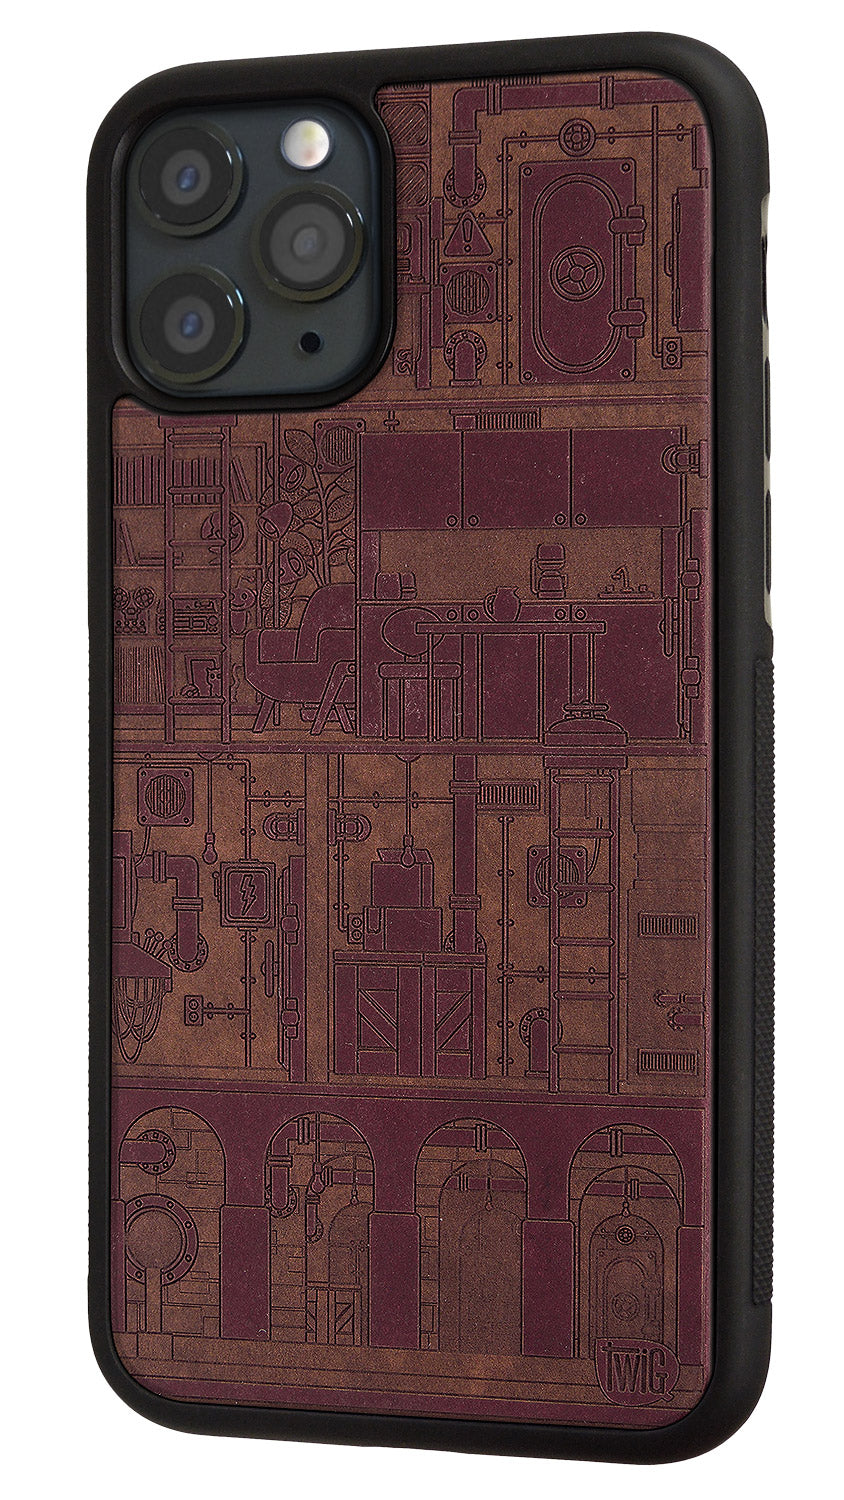 The Bunker - Color Paper iPhone Case, iPhone Case - Twig Case Co.